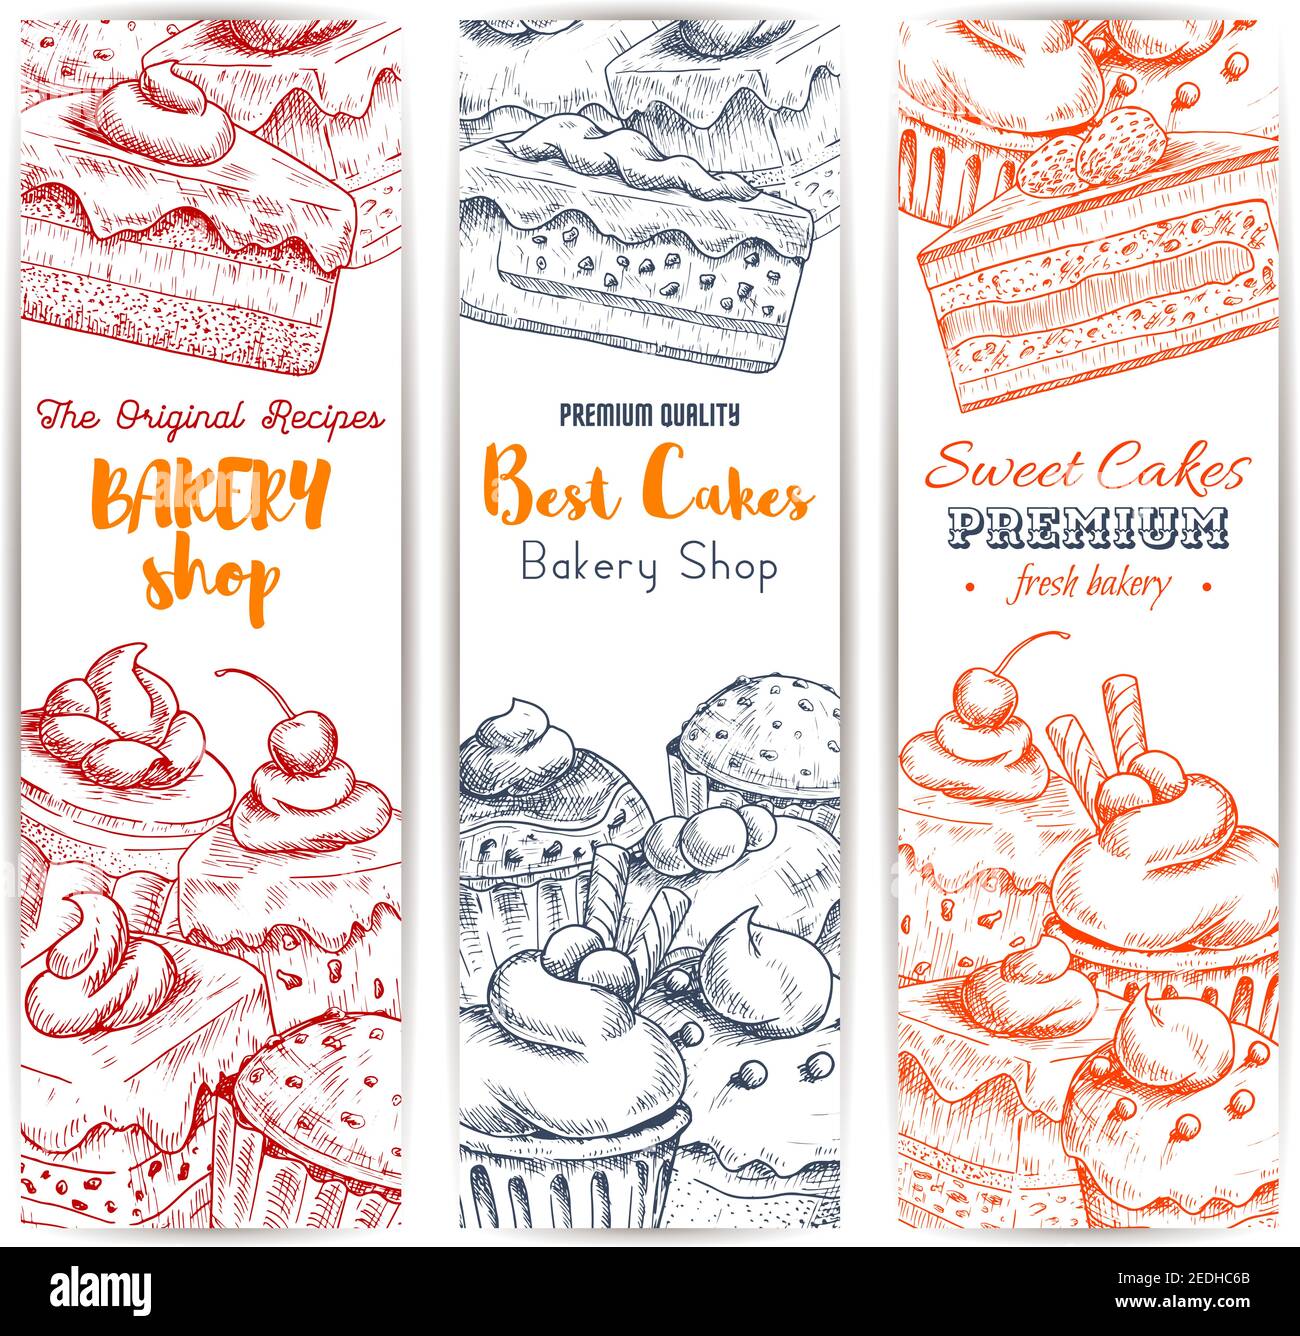 Bakery, pastry sweets and desserts sketch. Vector banners set with cakes and cupcakes, chocolate muffins, creamy pies and tarts, vanilla biscuit puddi Stock Vector